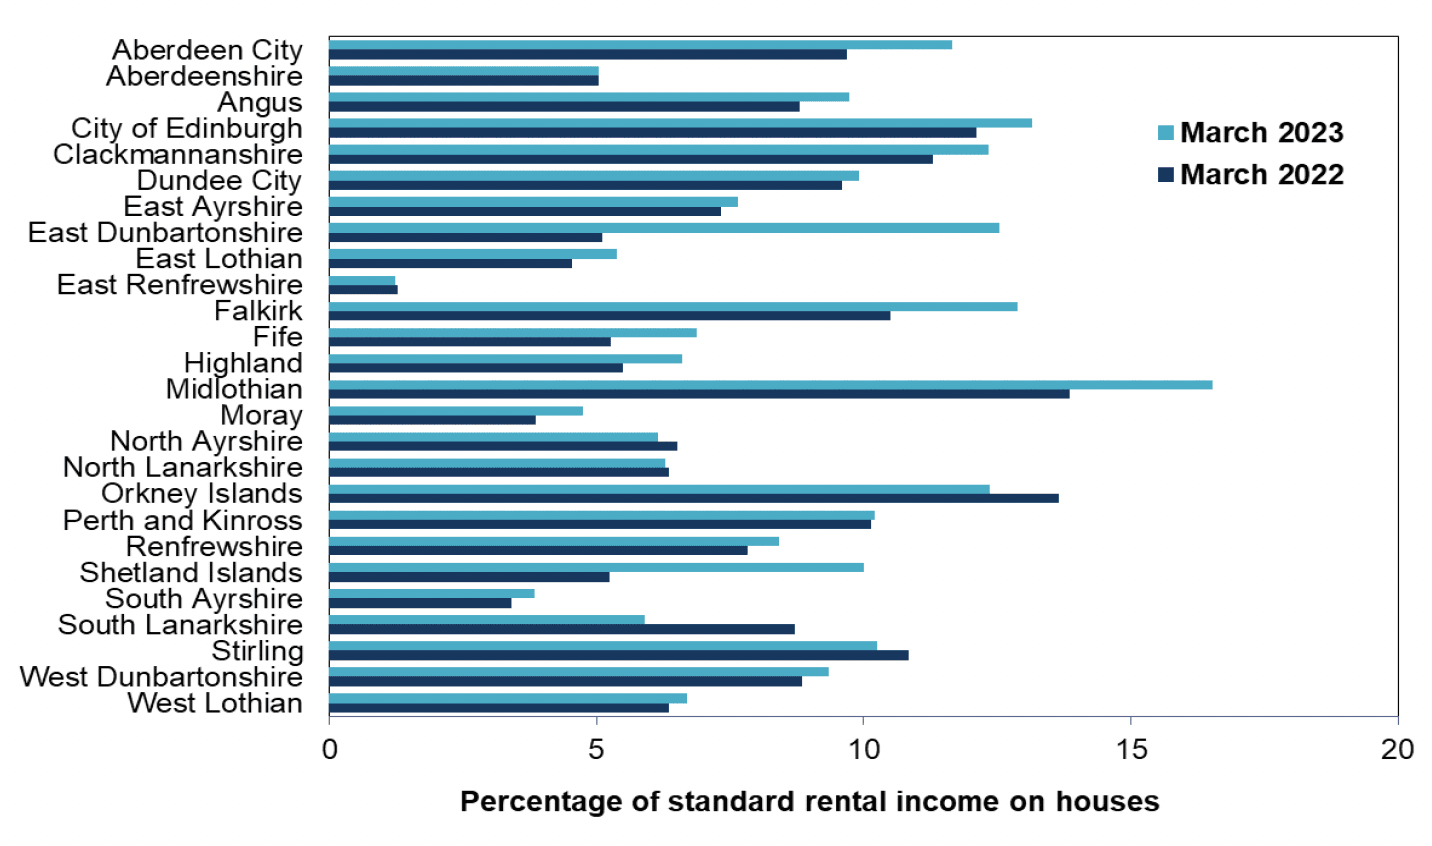 Bar chart showing rent arrears as a percentage of total rental income, for dwellings, by local authority, 2018-19 and 2022-23.   